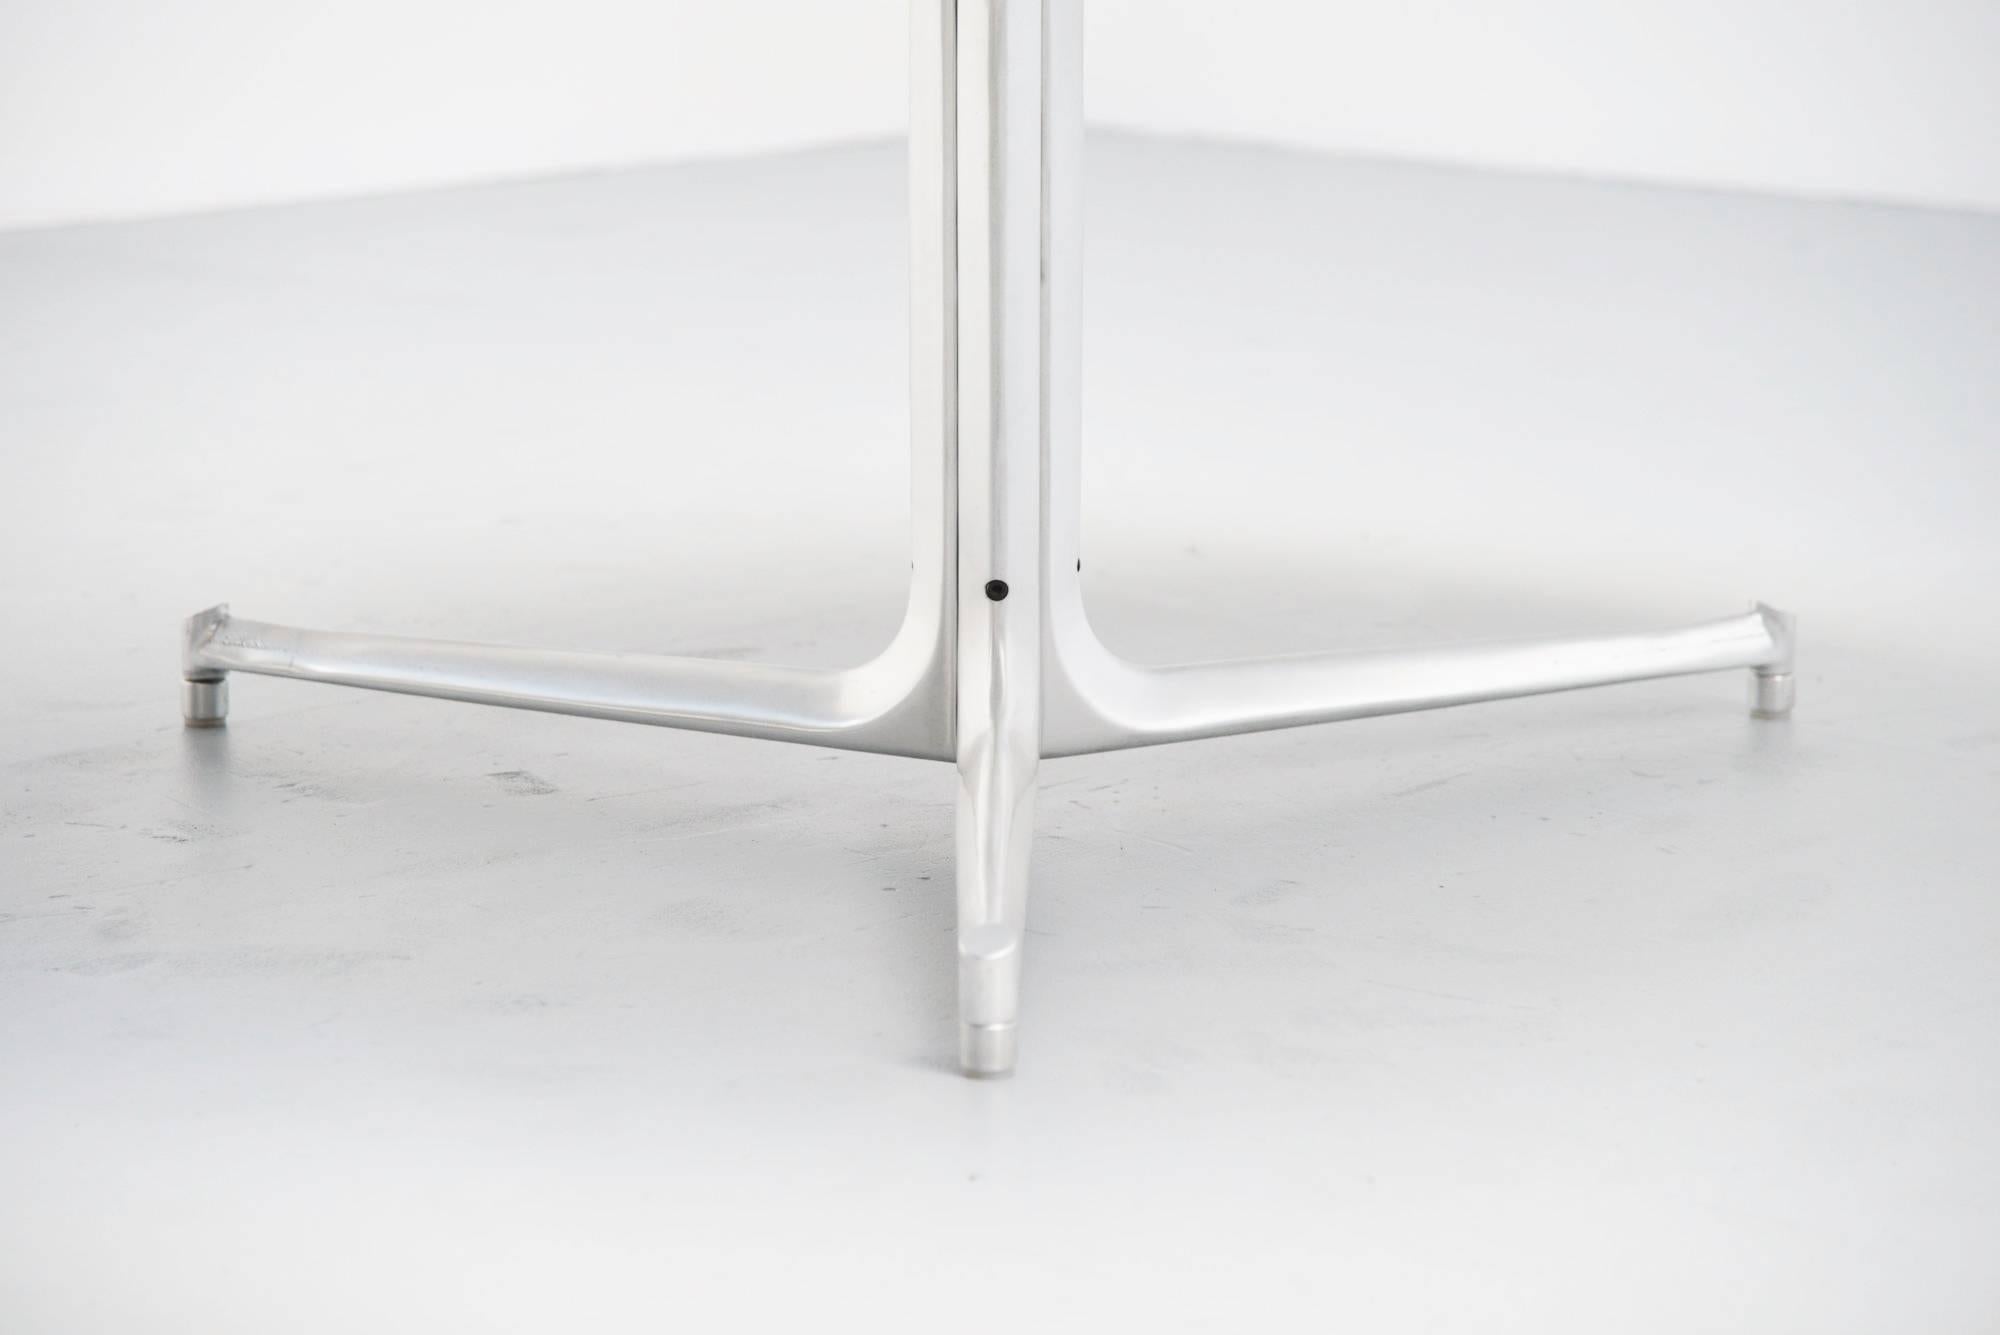 Fantastic large round dining table model T105 designed by Preben Fabricius and Jorgen Kastholm, manufactured by Kill International, Germany, 1968. This monumental table has a solid brushed steel base existing in three parts connected in the middle.